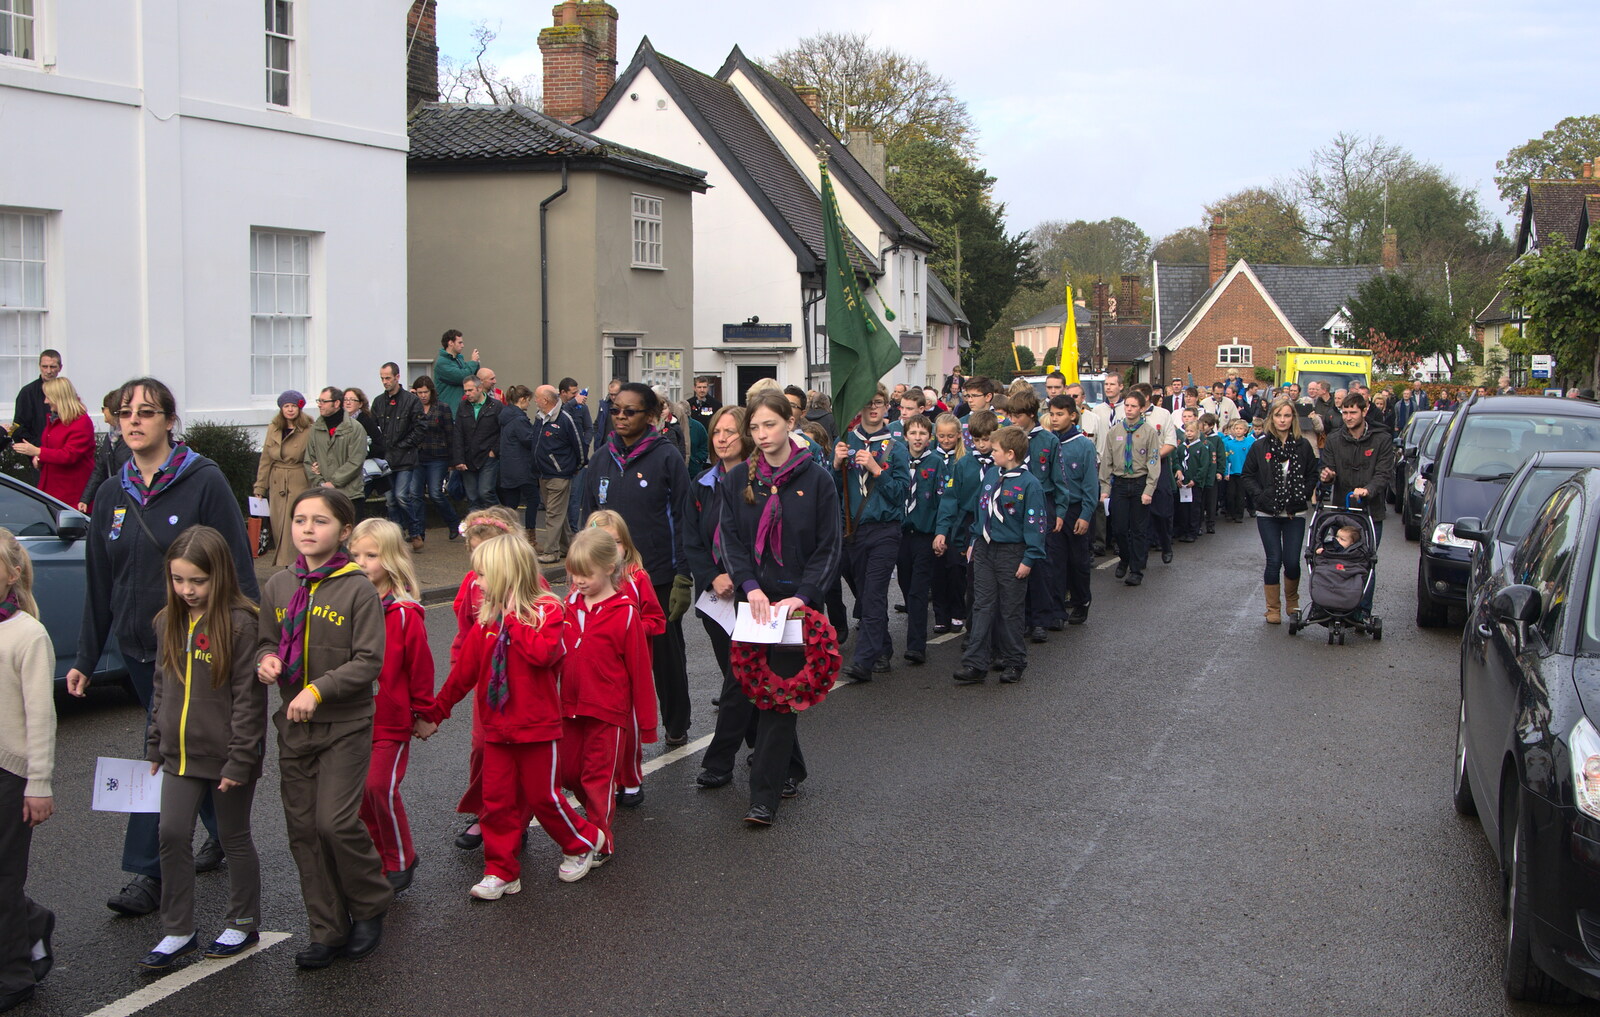 Various columns of Brownies, Cubs and Scouts from A Remembrance Sunday Parade, Eye, Suffolk - 9th November 2014